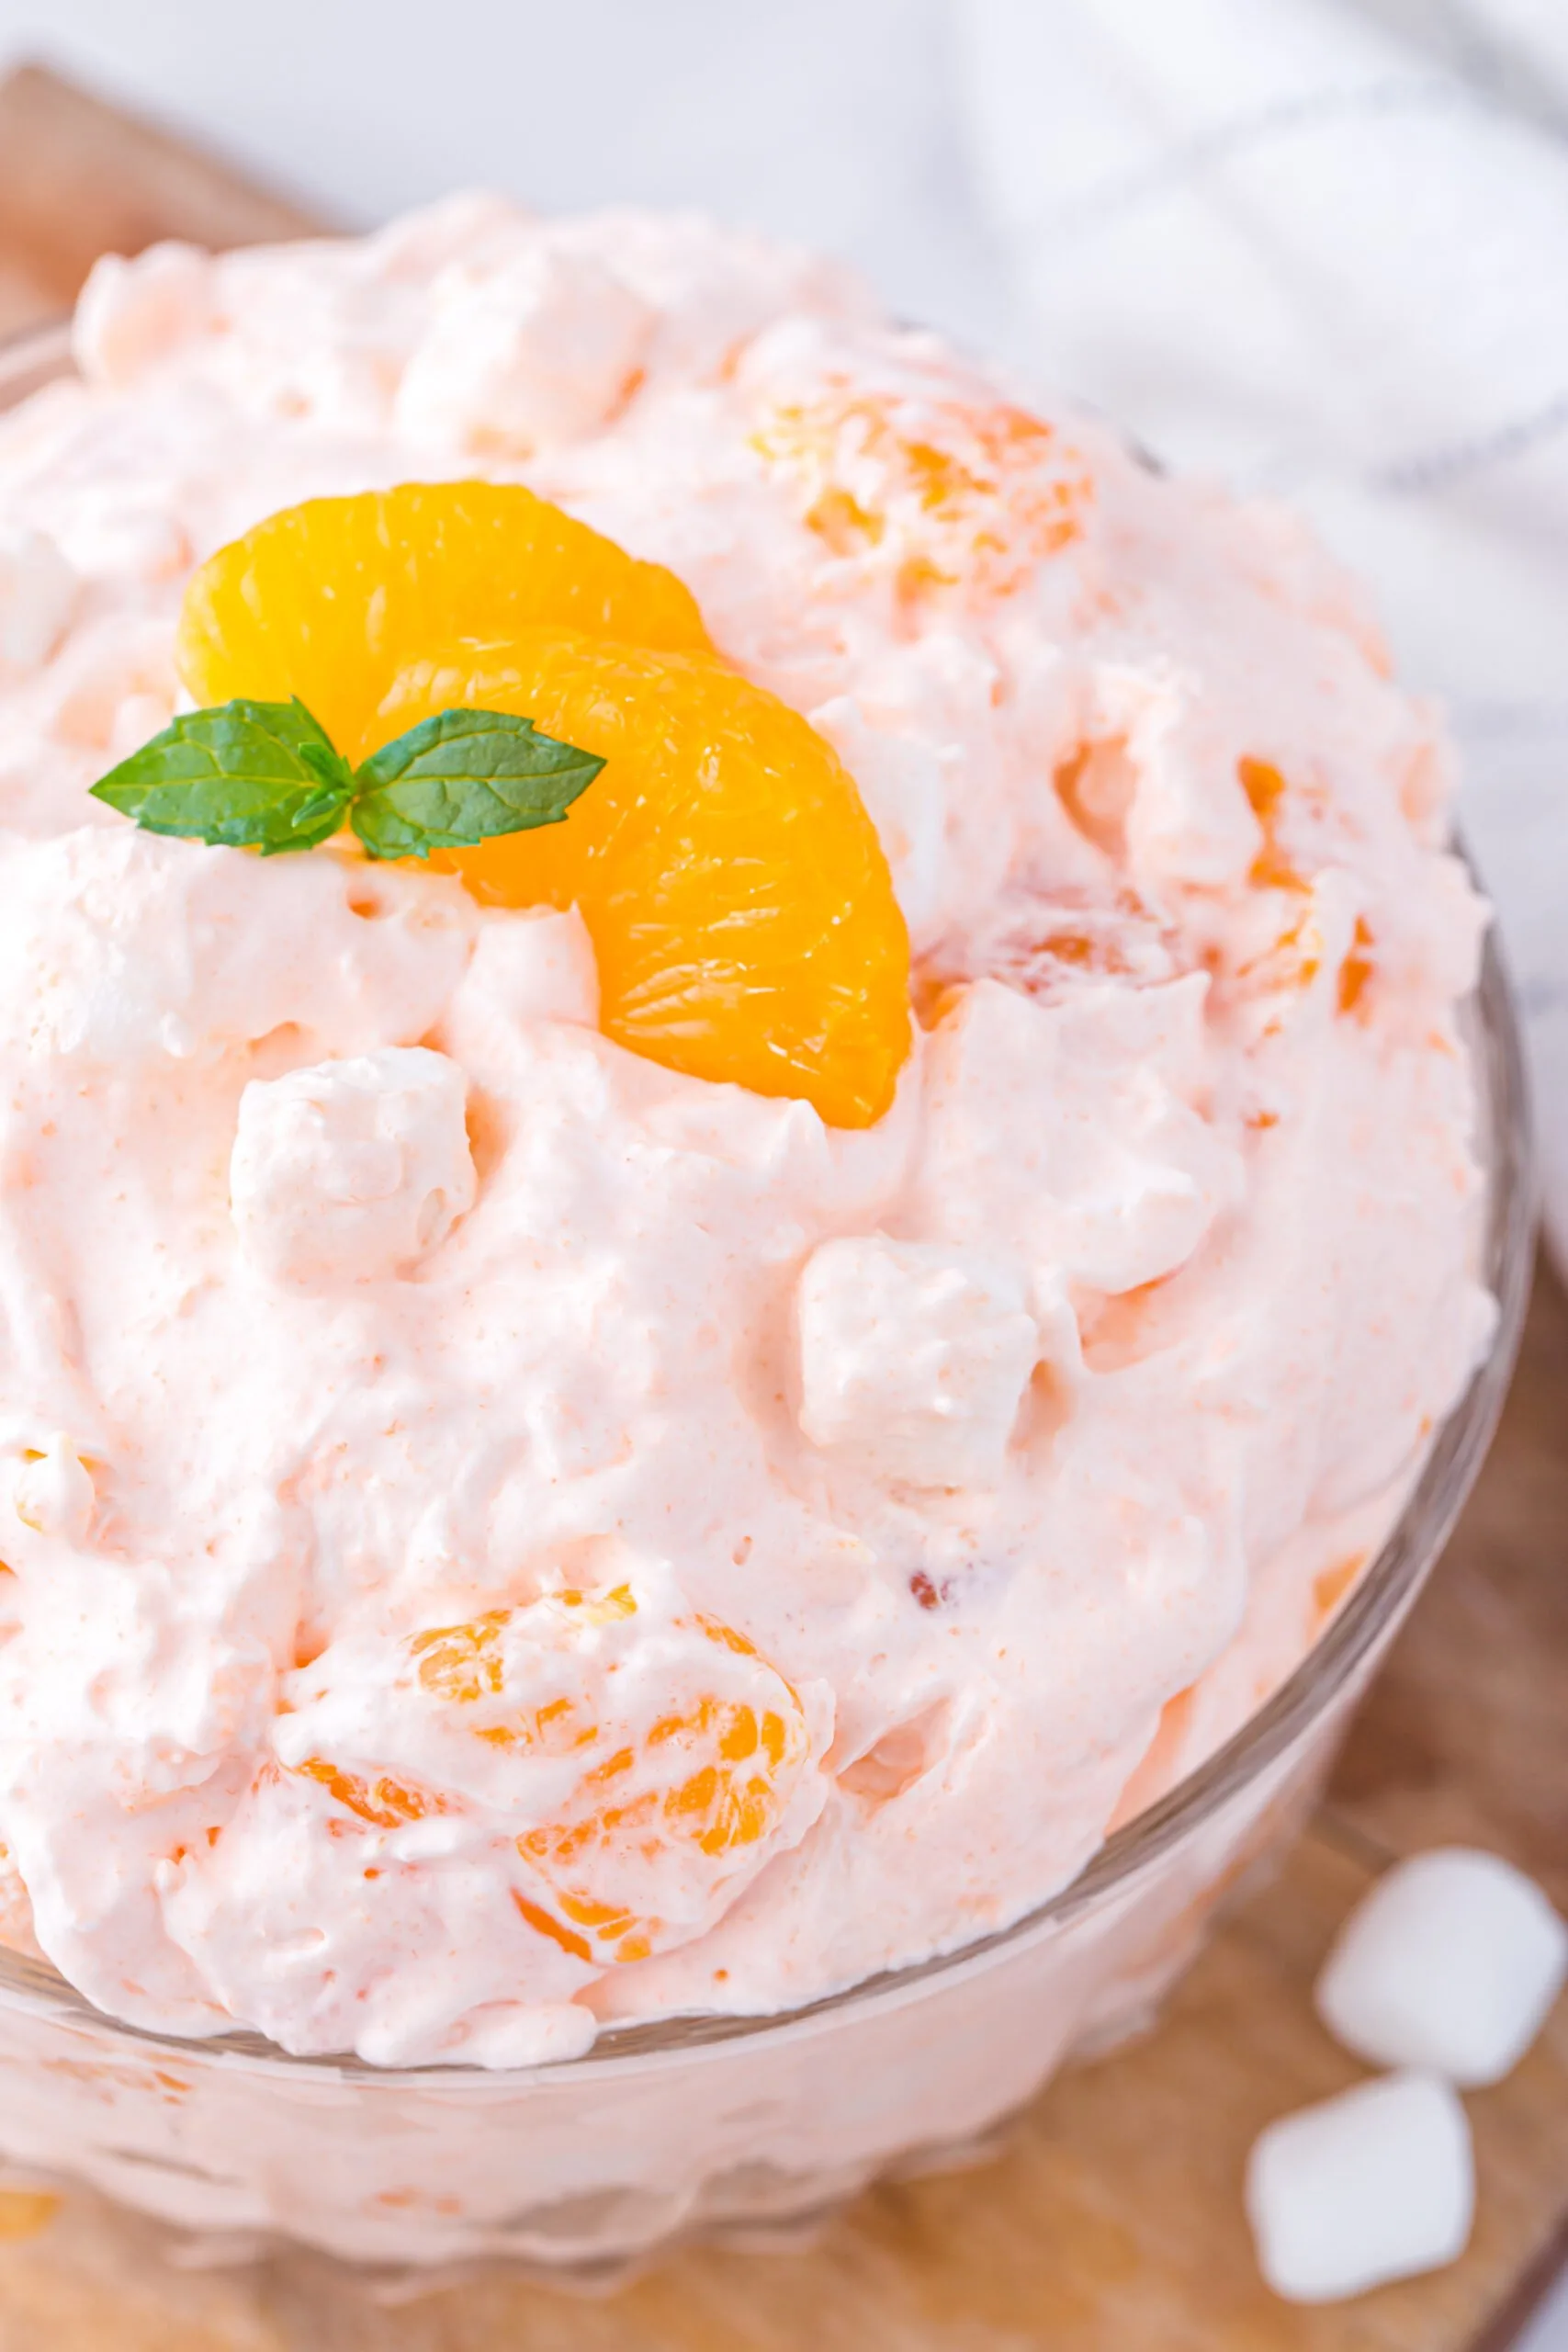 fluffy orange dessert made with whipped topping and canned mandarin orange. Topped with slice of mandarin orange and fresh mint sprig.